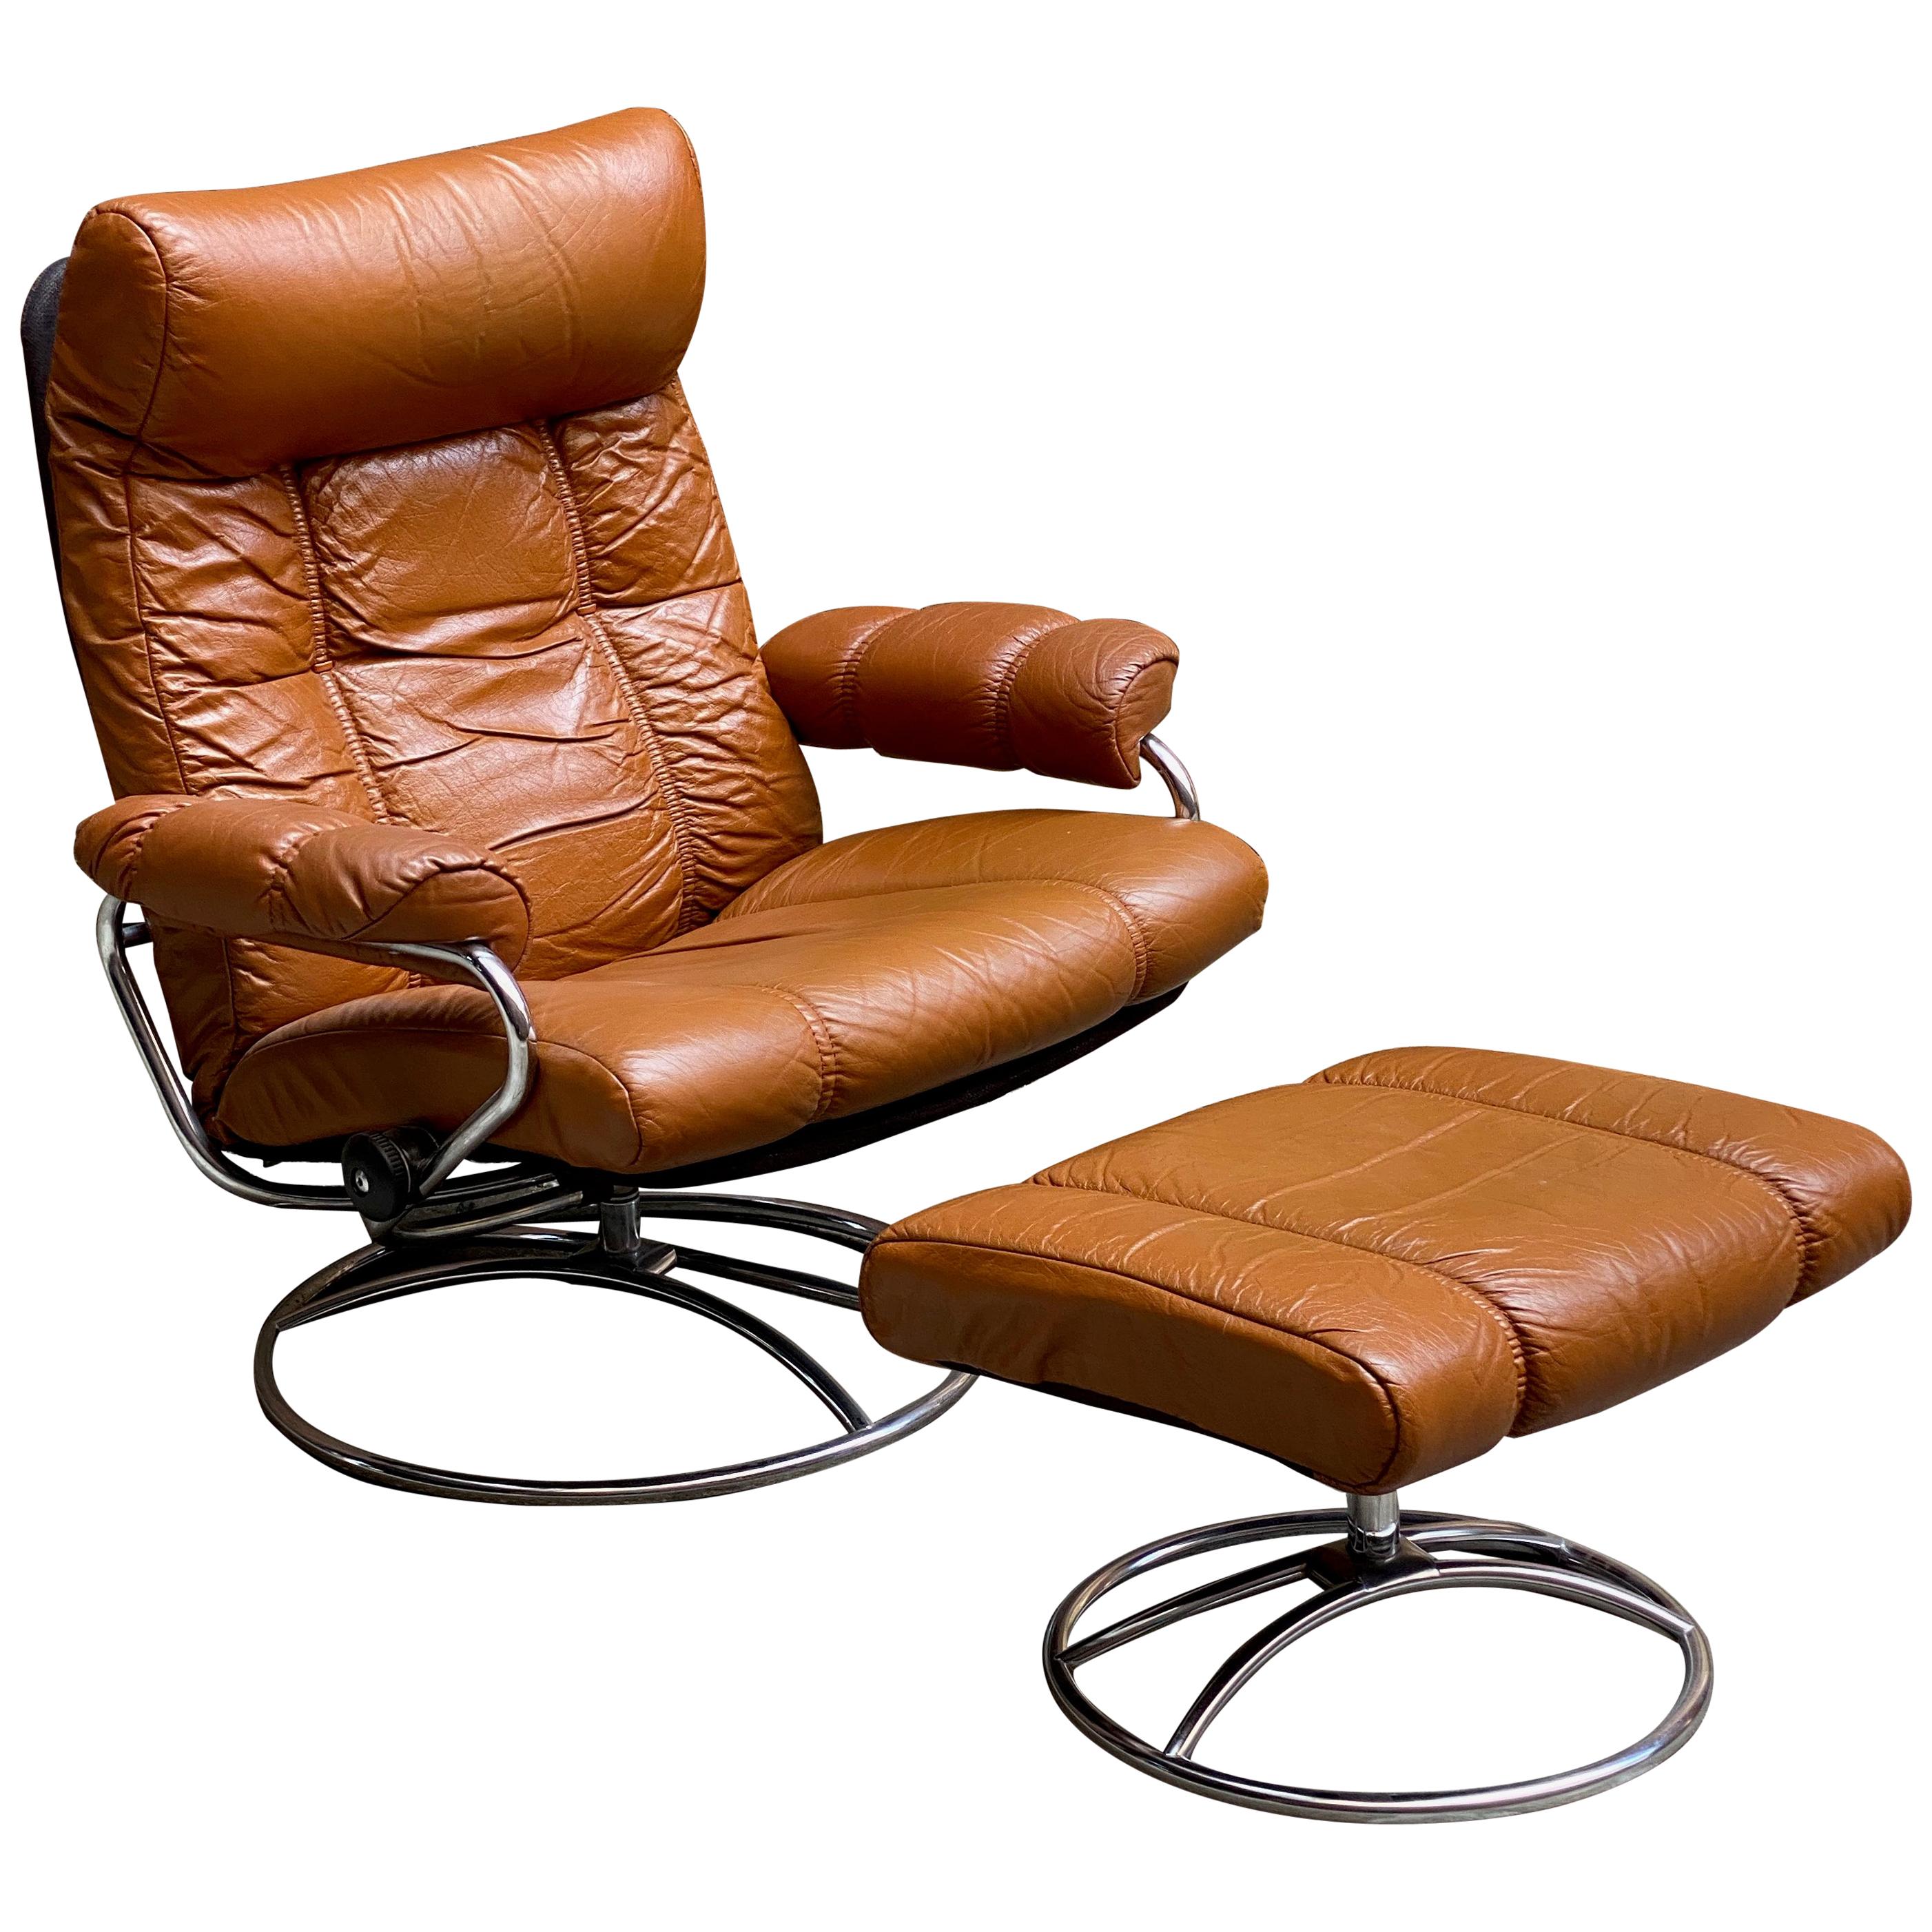 Ekornes Stressless Butterscotch Leather Lounge Chair and Ottoman